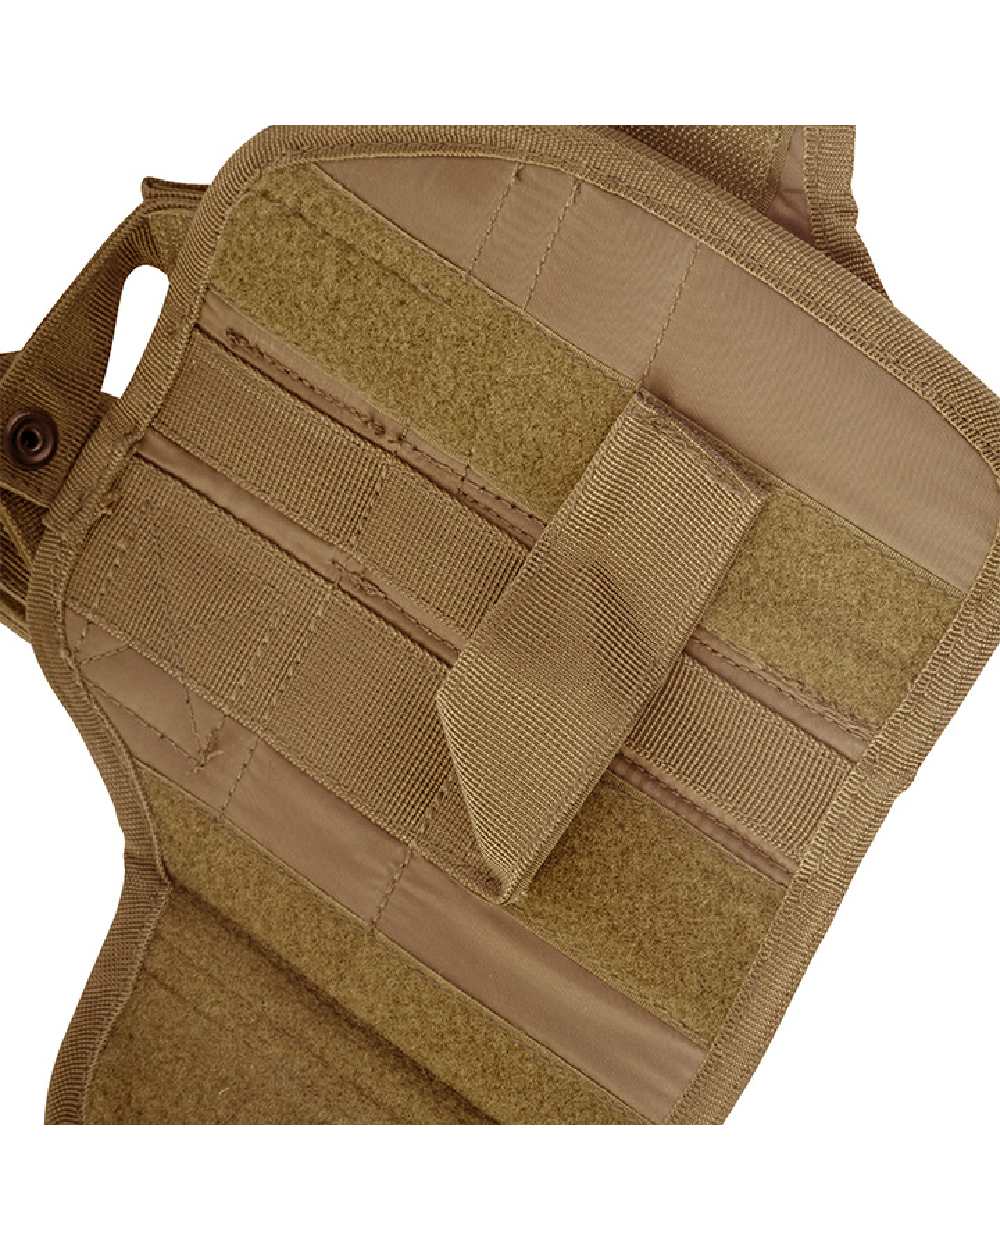 Viper Adjustable Holster in Coyote 